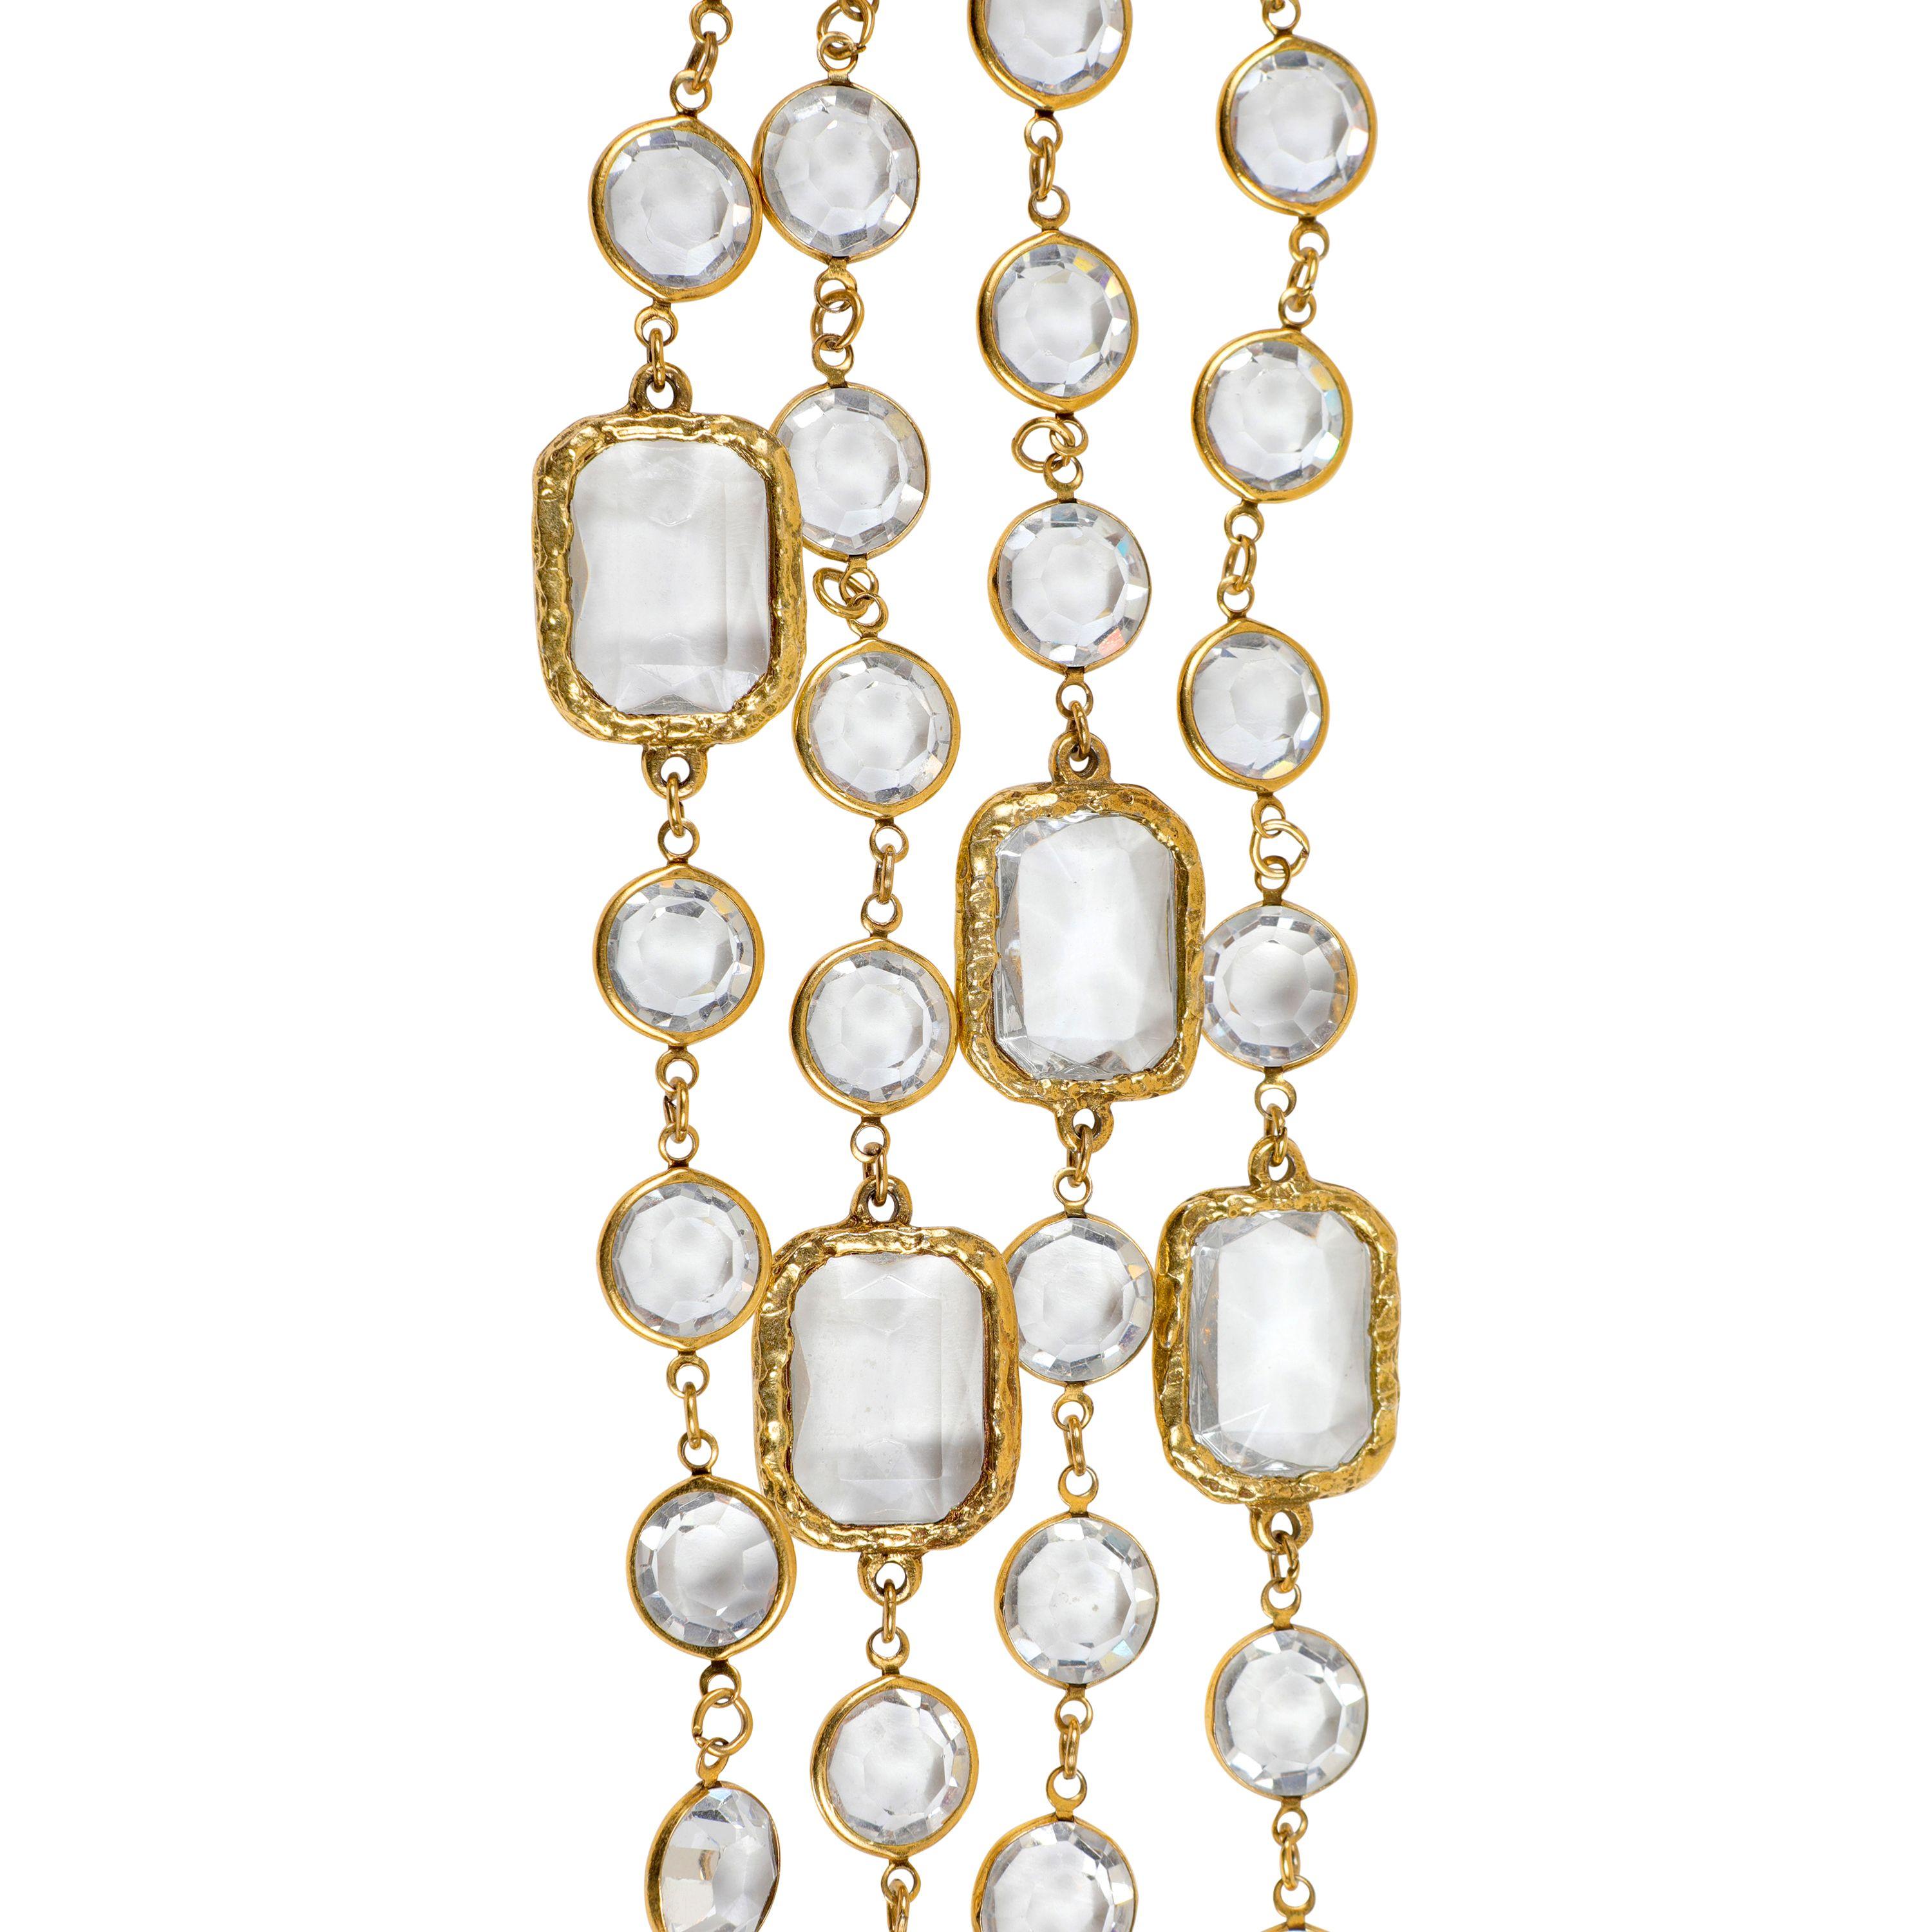 This authentic Chanel Faceted Crystal Necklace is in excellent vintage condition.    Round faceted crystals are interspersed with large rectangular crystals.  Gold tone hardware.   Pouch or box included.

PBF 13707
